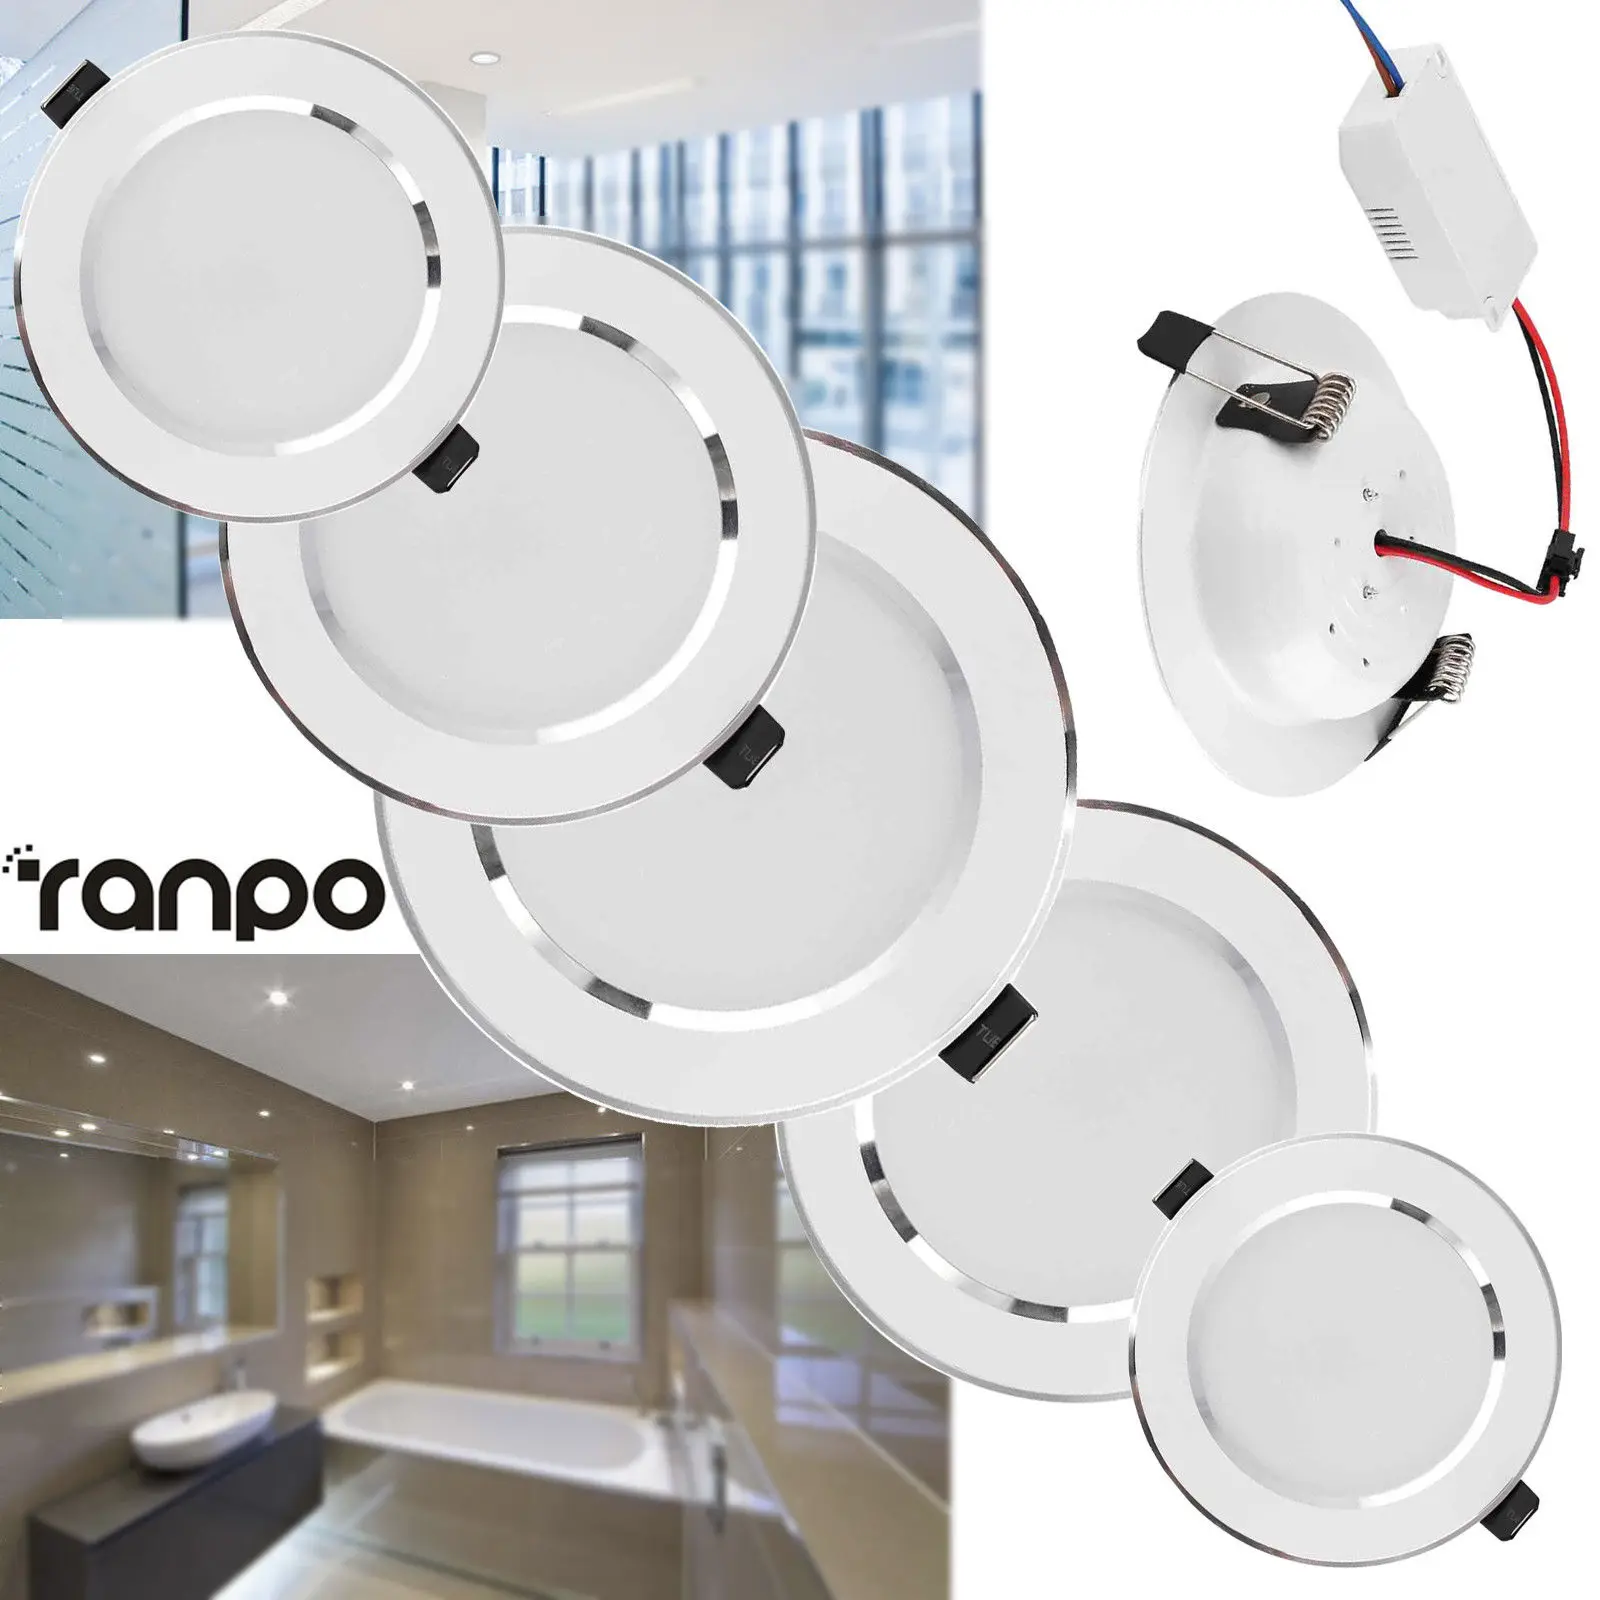 LED Panel Downlight Recessed Ceiling Light 3W 5W 7W 9W 12W 15W 18W Lamp Cool White Warm White 110V 220V 85-265V High Quality